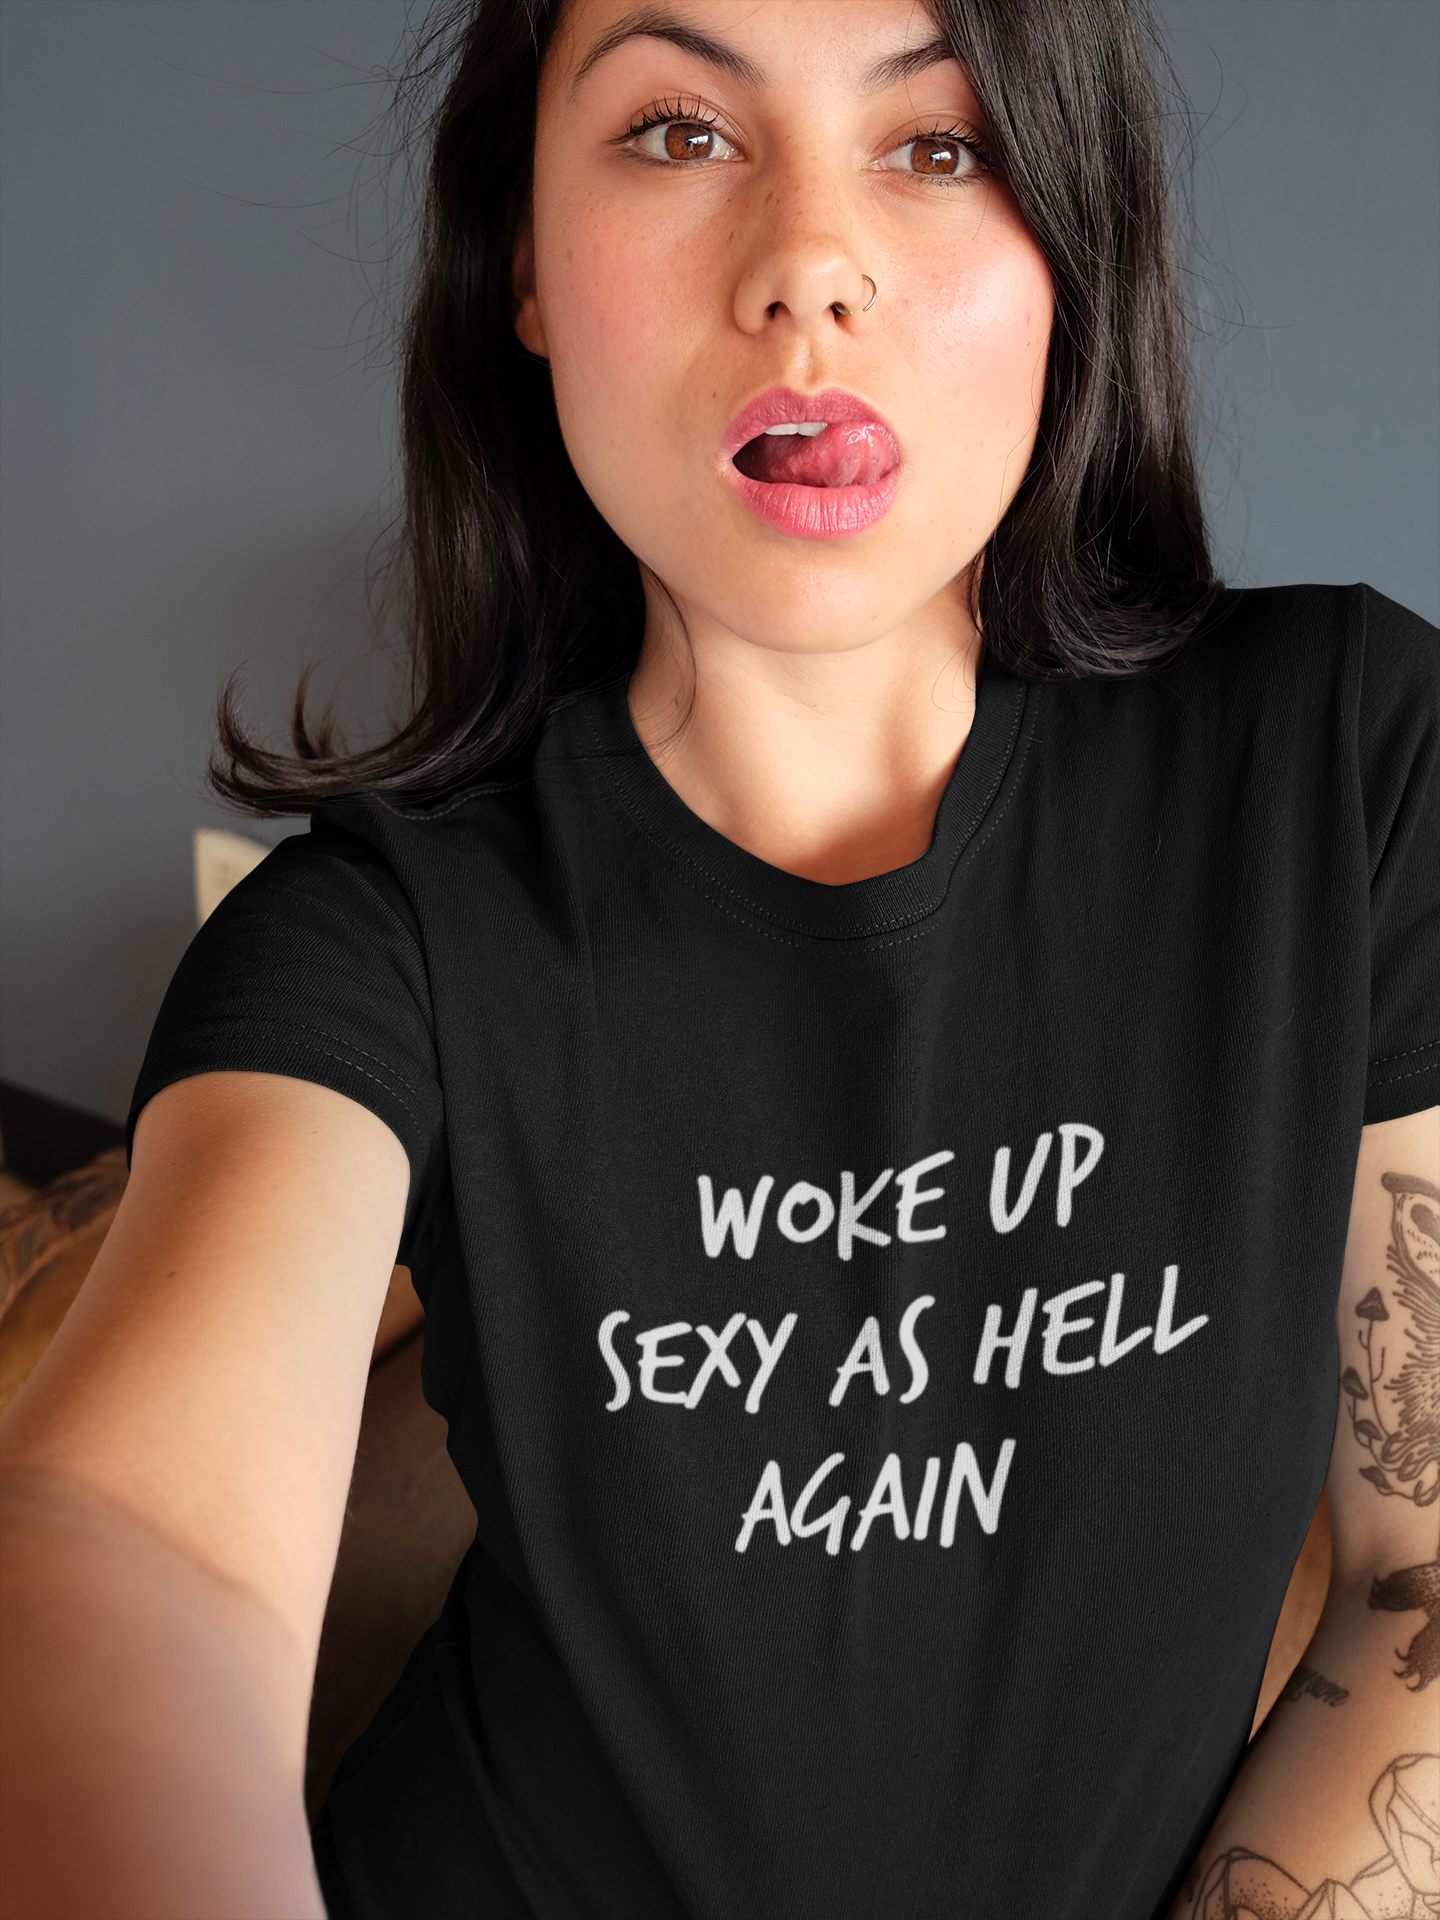 Sexy as hell t-shirt